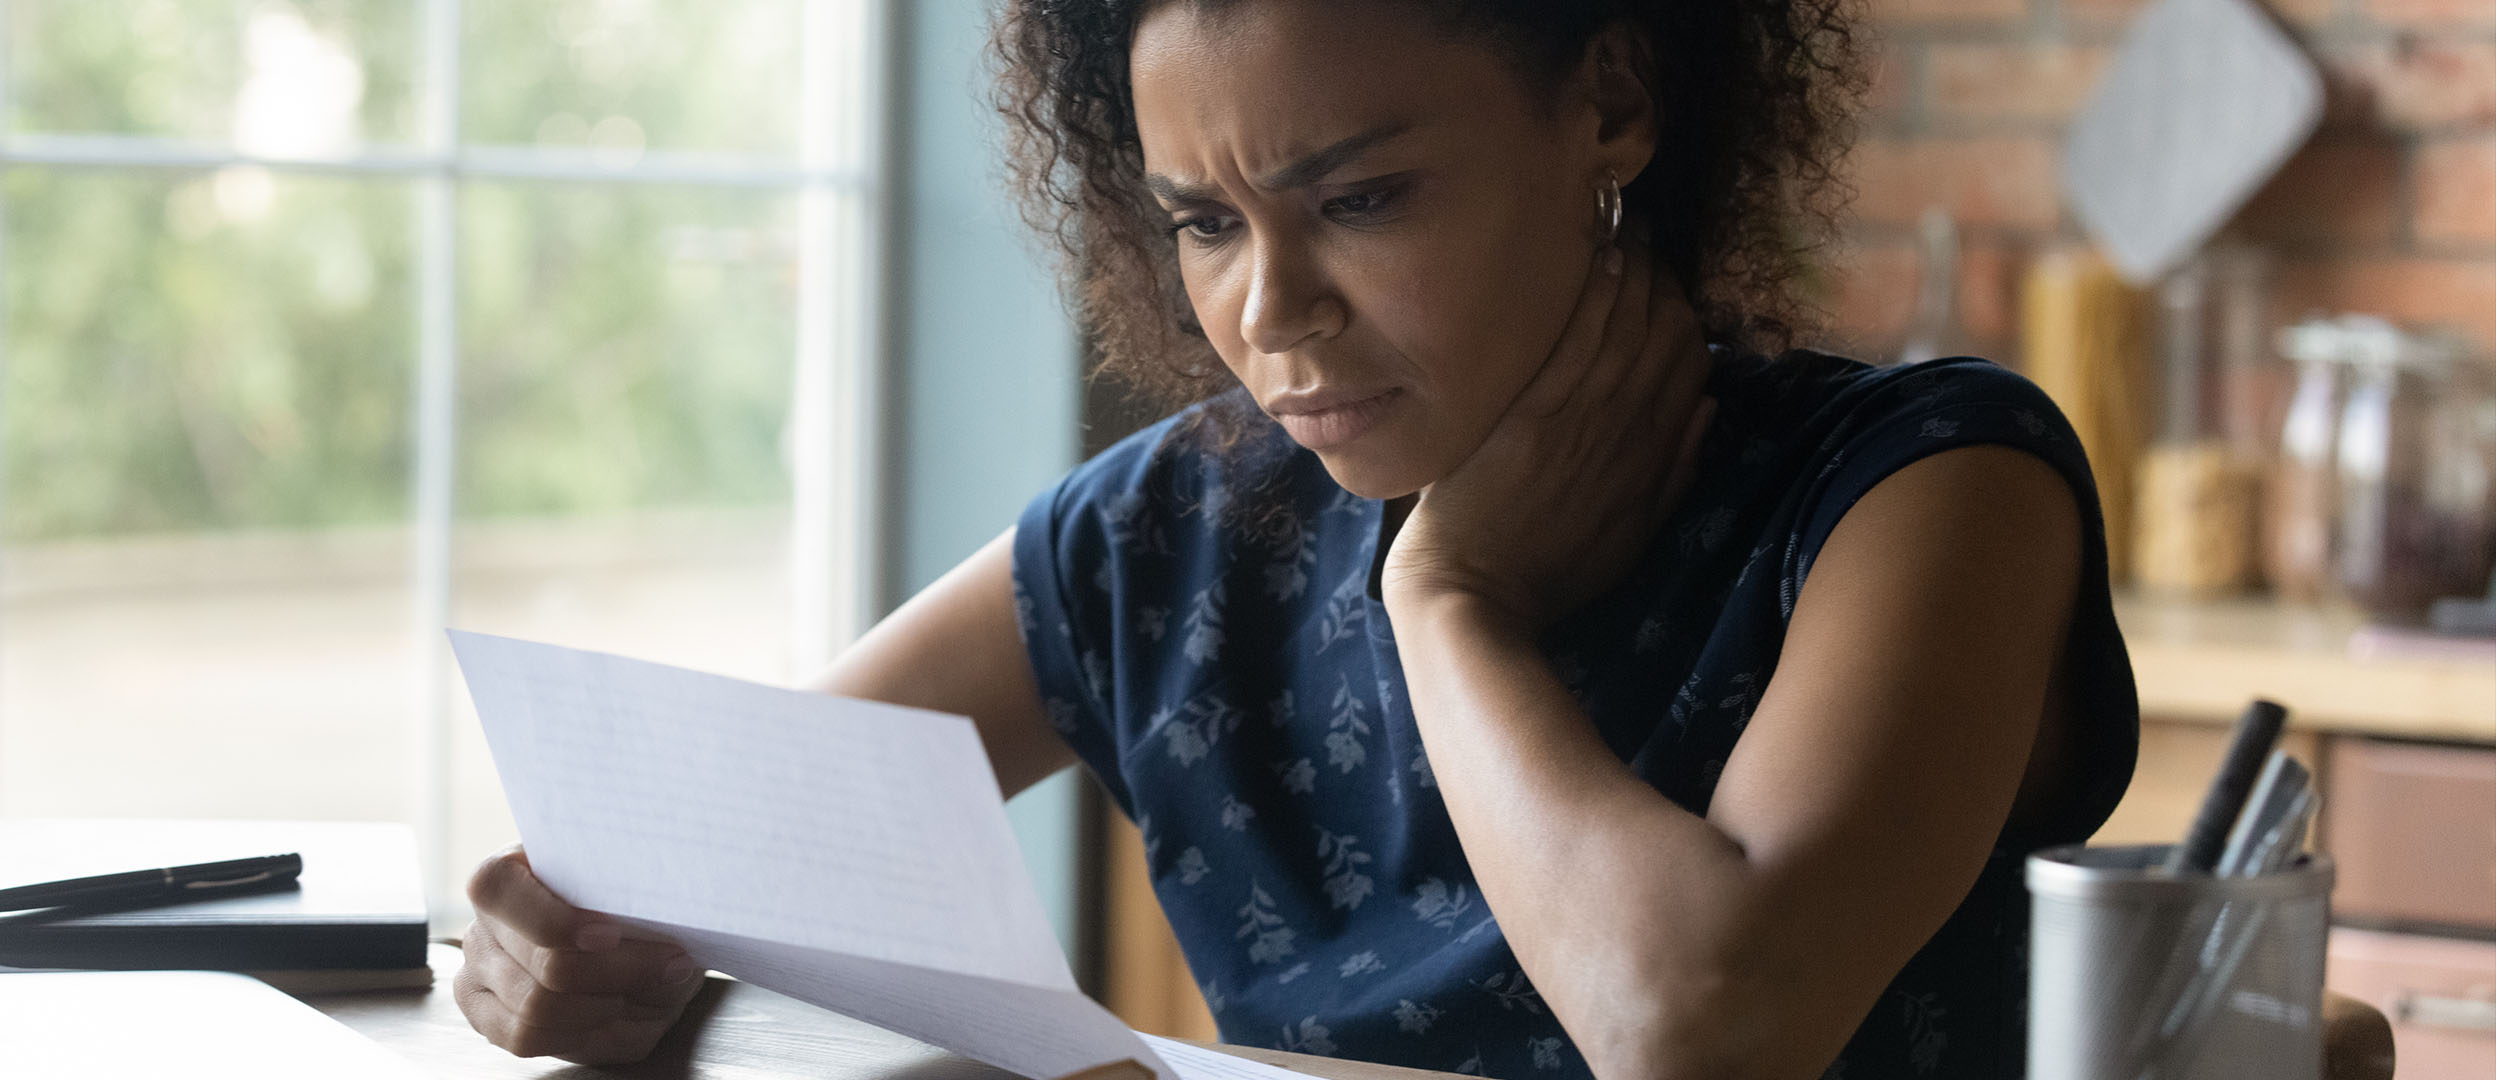 Woman reading paper looks stressed